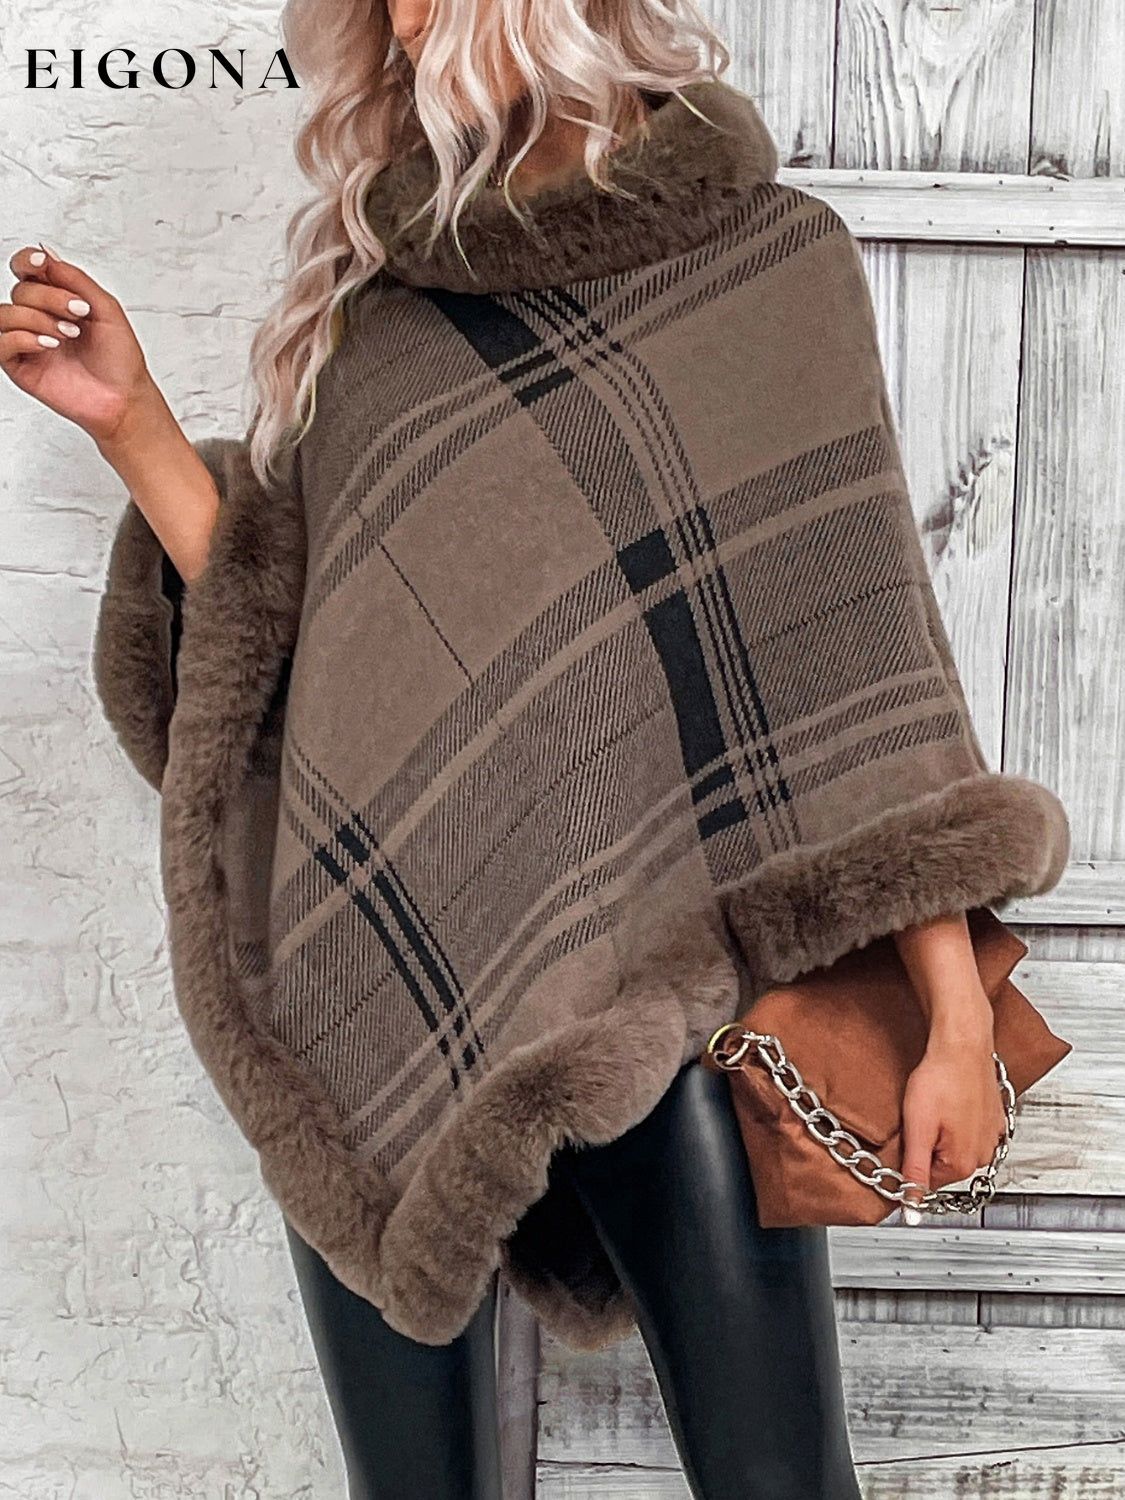 Plaid Faux Fur Trim Fashion Poncho Sweater clothes Ship From Overseas Shipping Delay 09/30/2023 - 10/03/2023 Sounded Sweater sweaters